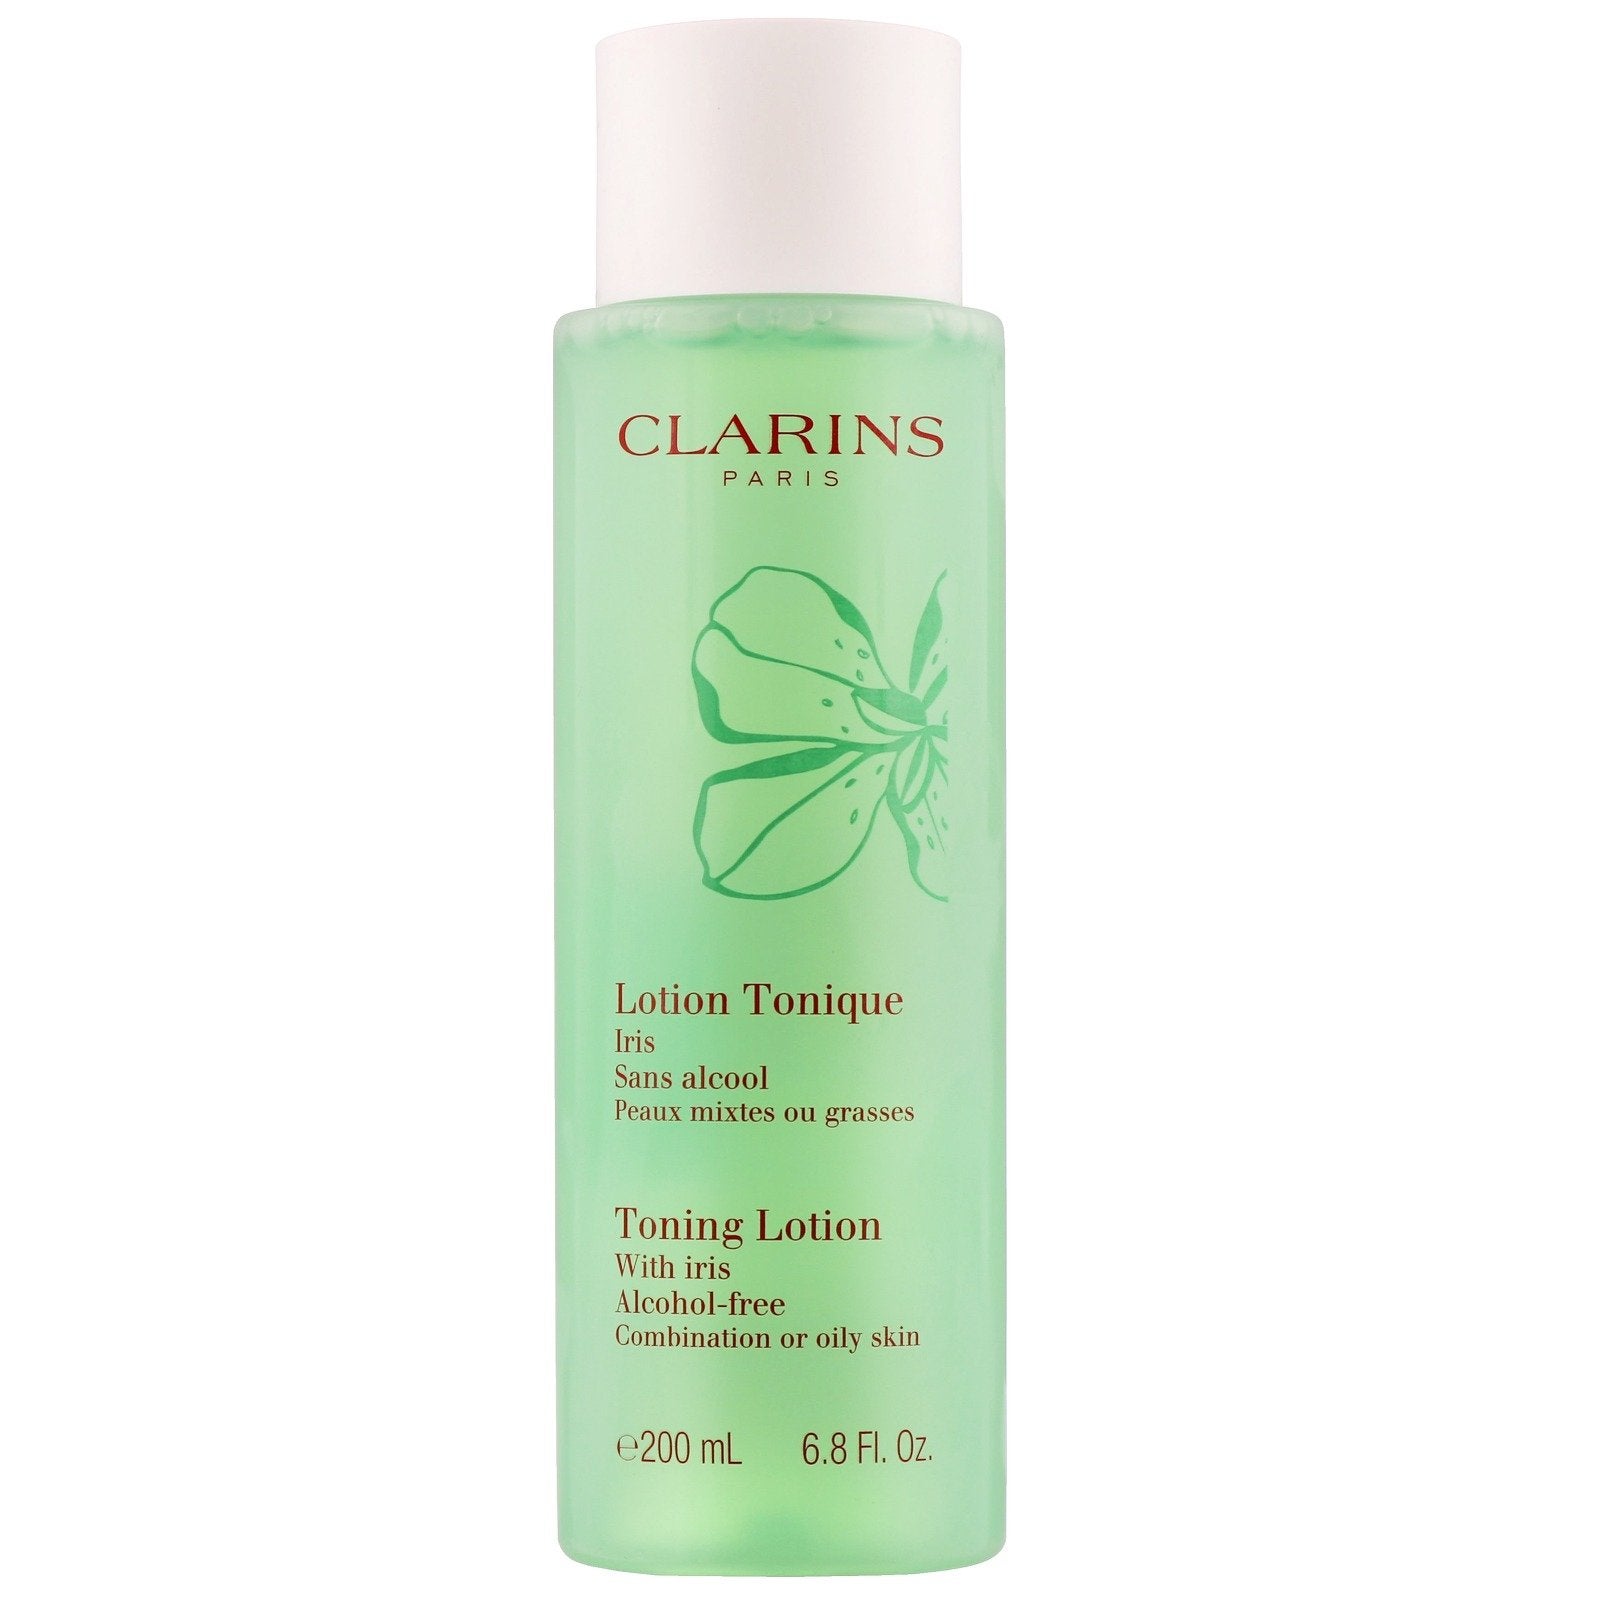 WHOLESALE CLARINS TONING LOTION WITH IRIS COMBINATION OR OILY SKIN 6.8 OZ - 48 PIECE LOT